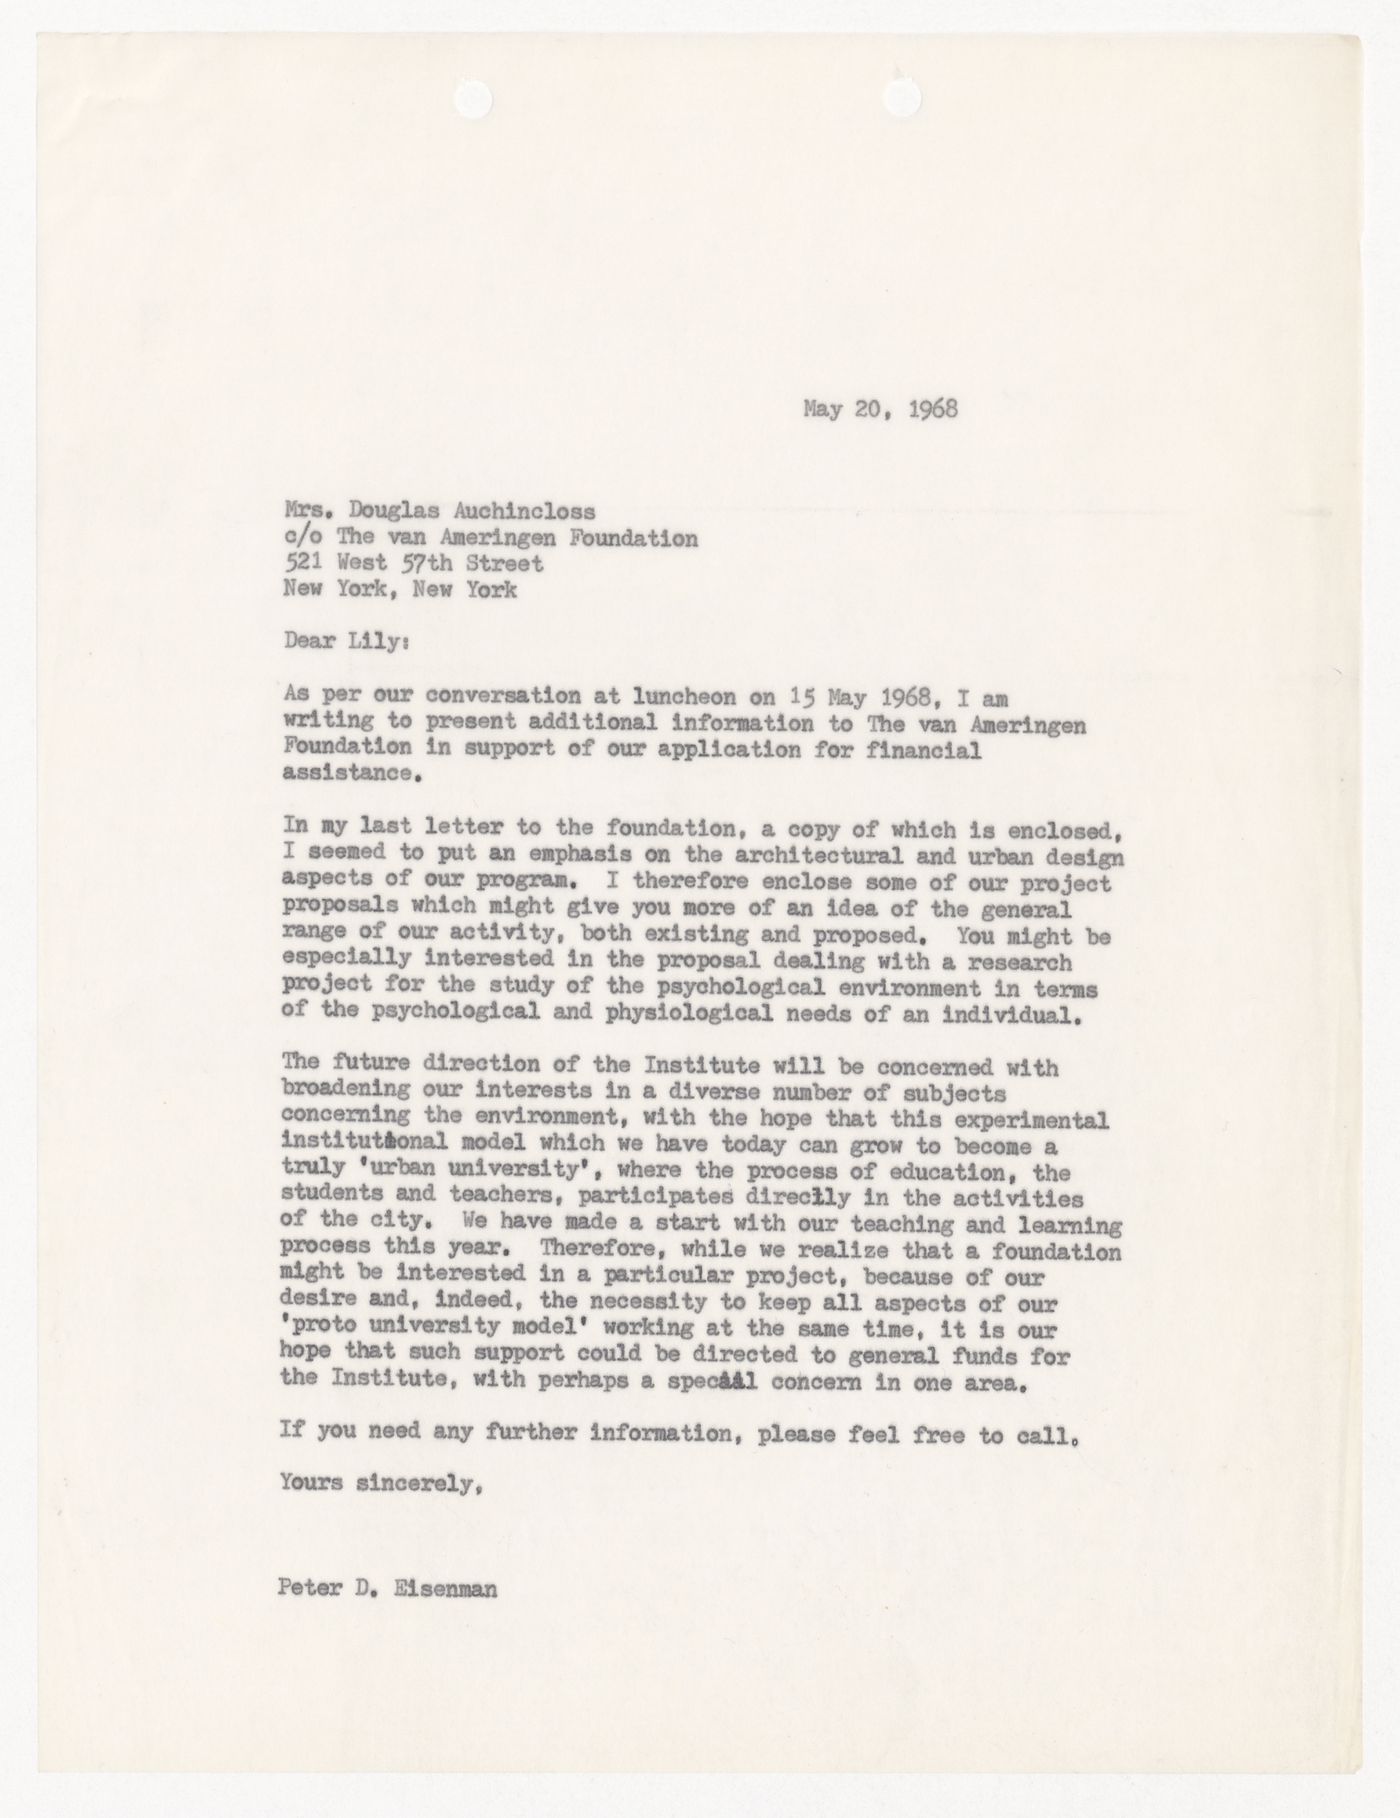 Letter from Peter D. Eisenman to Mrs. Douglas Auchincloss about IAUS activities with attached project proposal